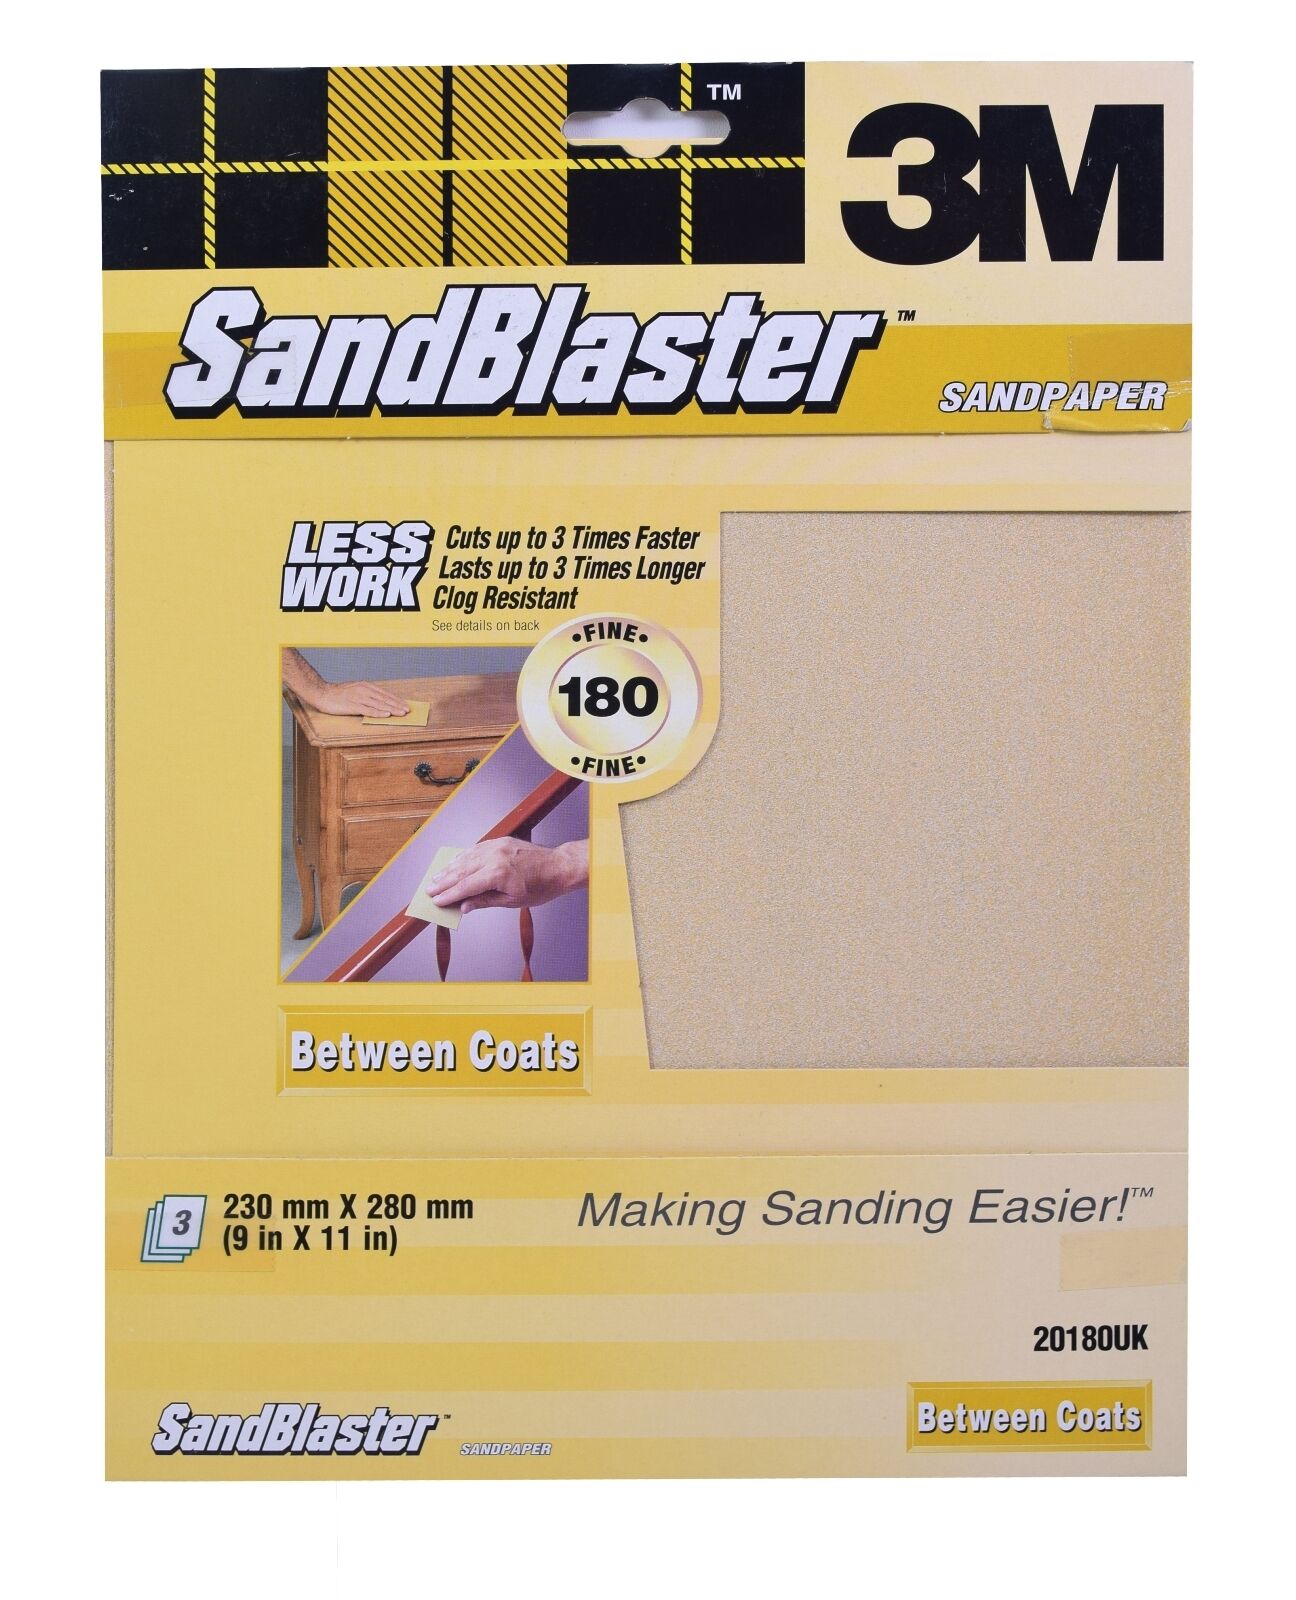 3M Sandblaster Sandpaper Sheets Paint Stripping, Bare Surfaces & Between Coats